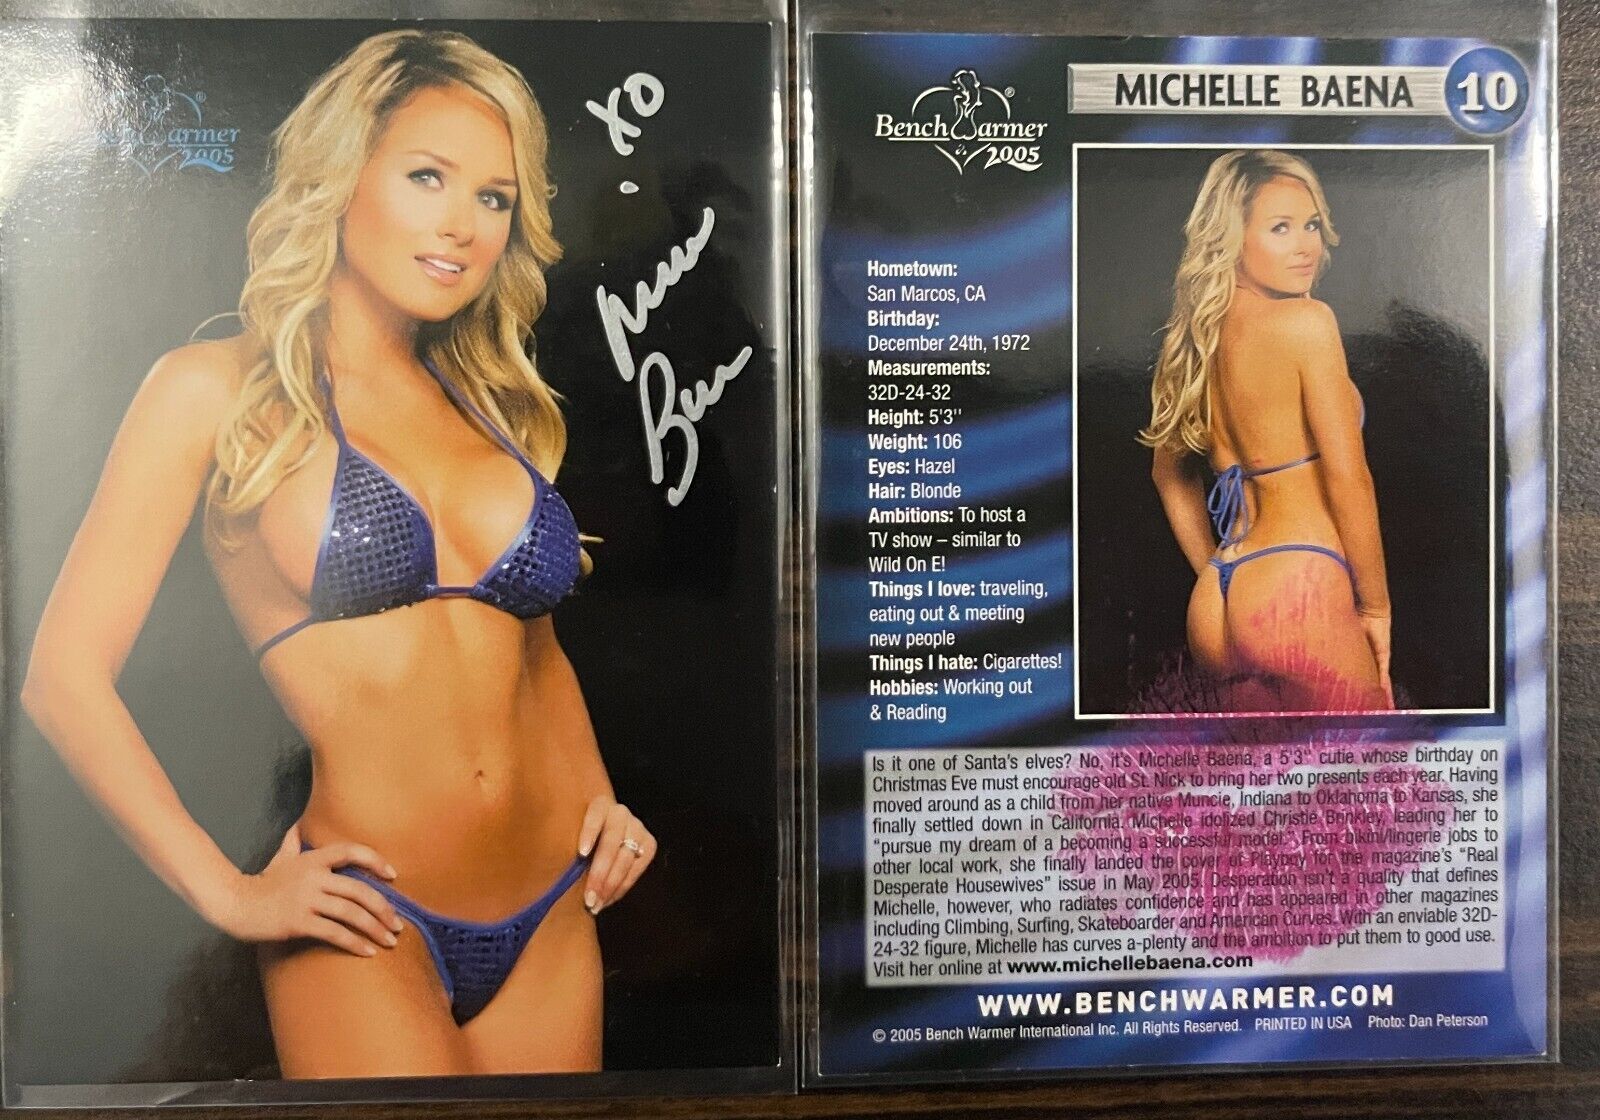 2013 BENCHWARMER CARD MICHELLE BAENA KISS PRINT AND SIGNED 